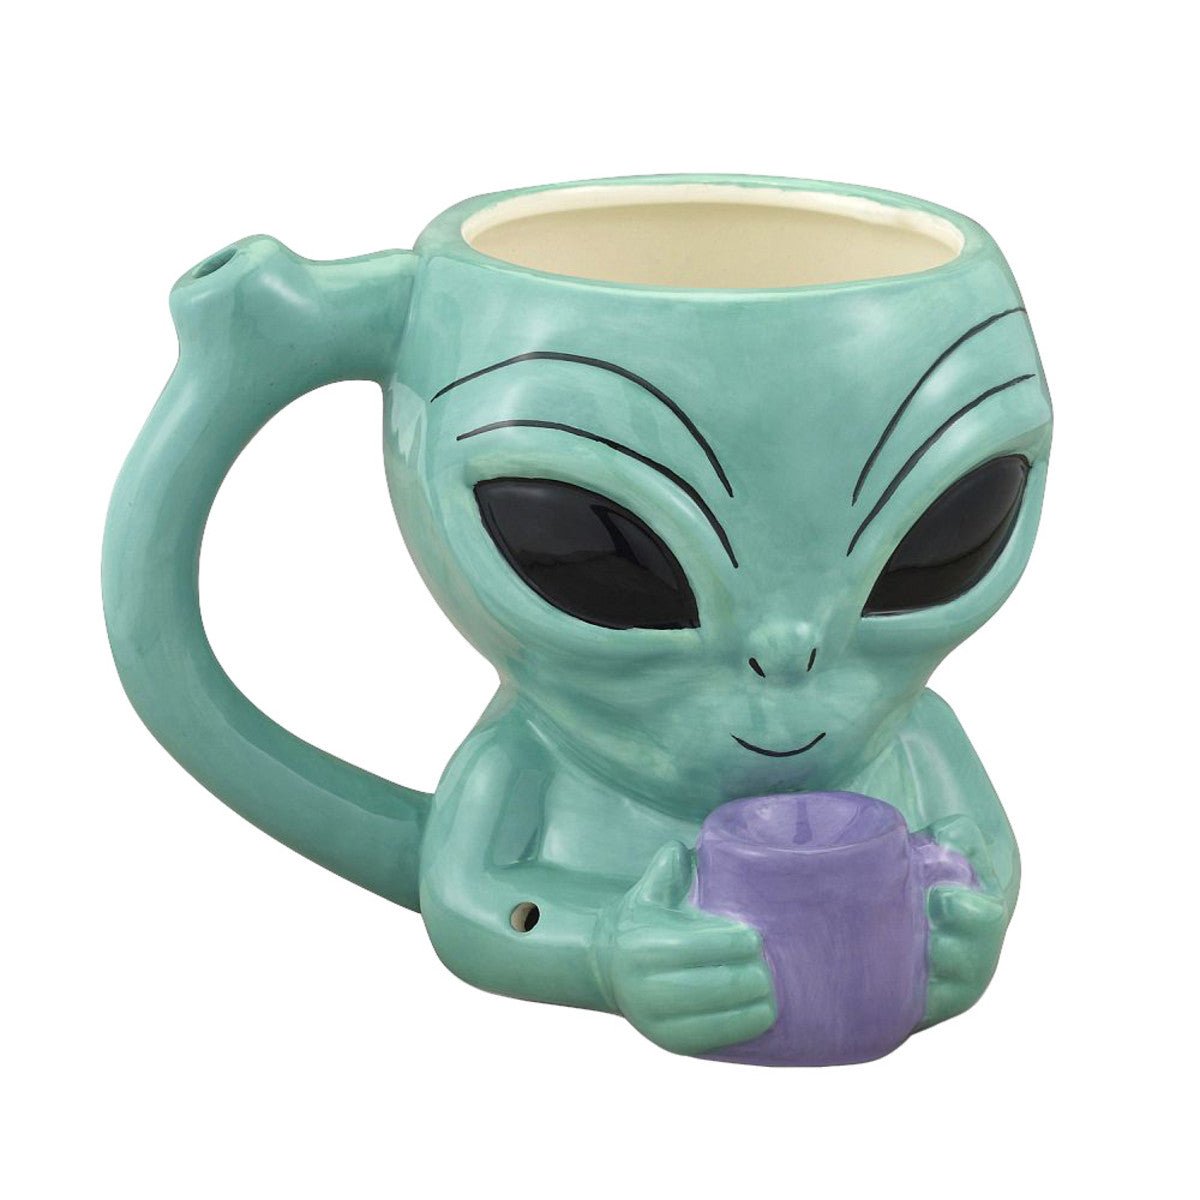 Take Me To Your Leader Mug Pipe - Horny Stoner